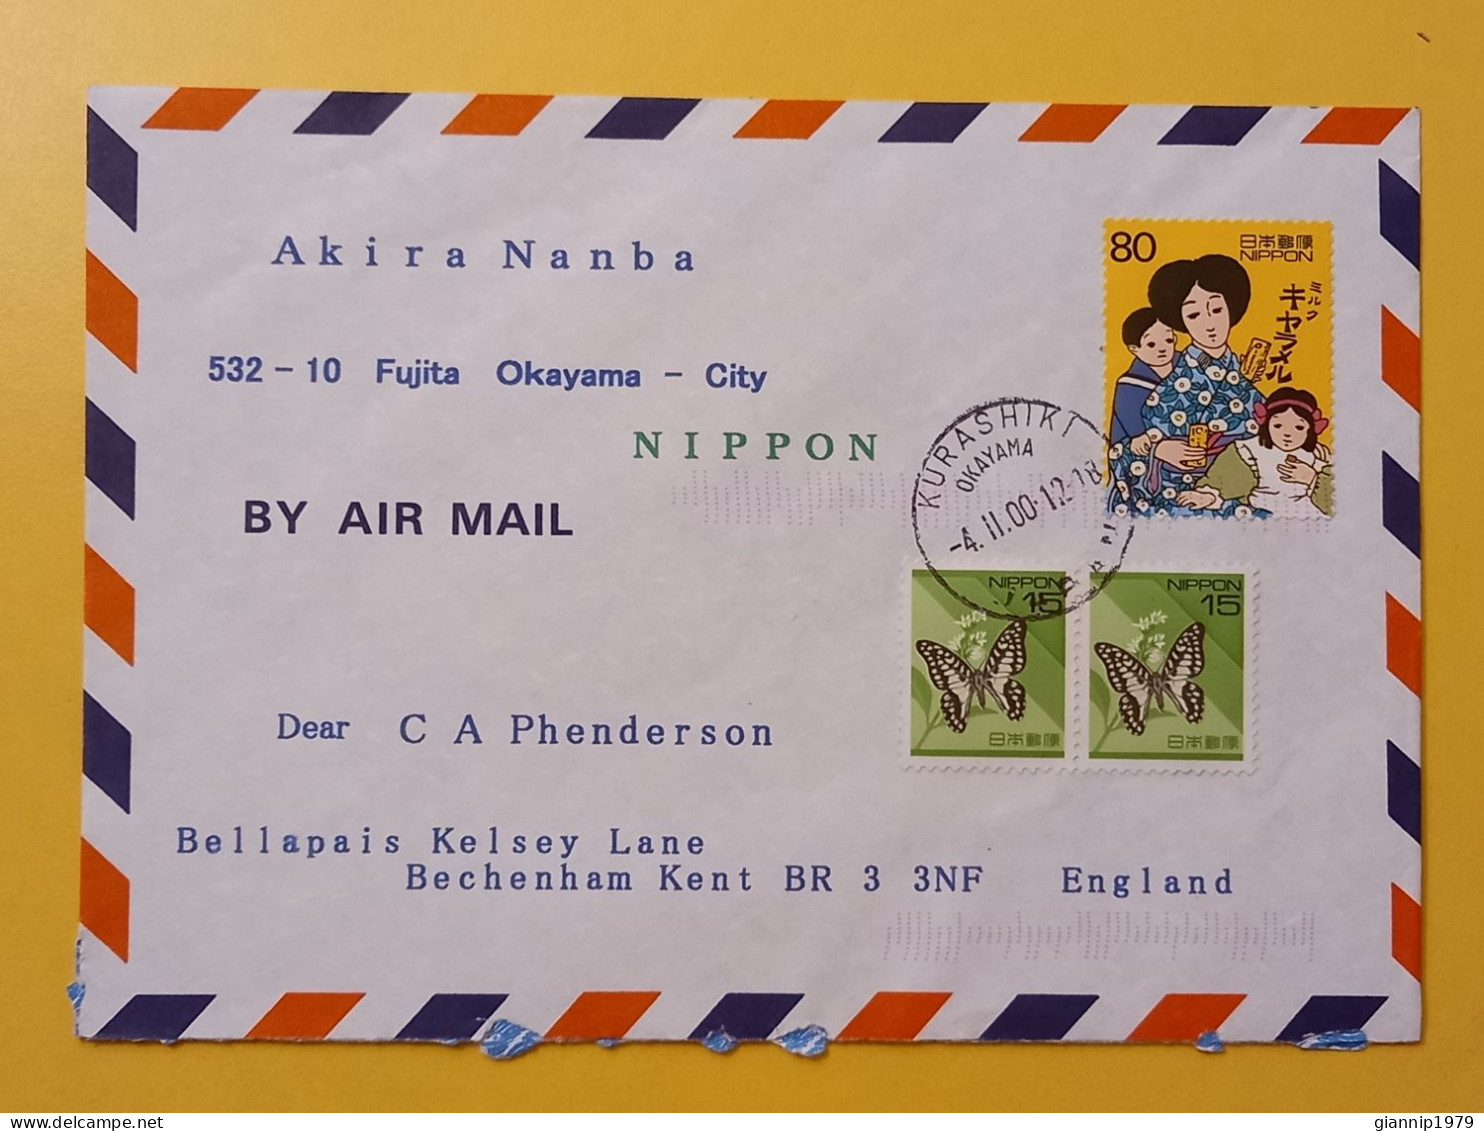 2000 BUSTA COVER AIR MAIL GIAPPONE JAPAN NIPPON BOLLO FARFALLE BUTTERFILES OBLITERE' KURASHIKI FOR ENGLAND - Lettres & Documents